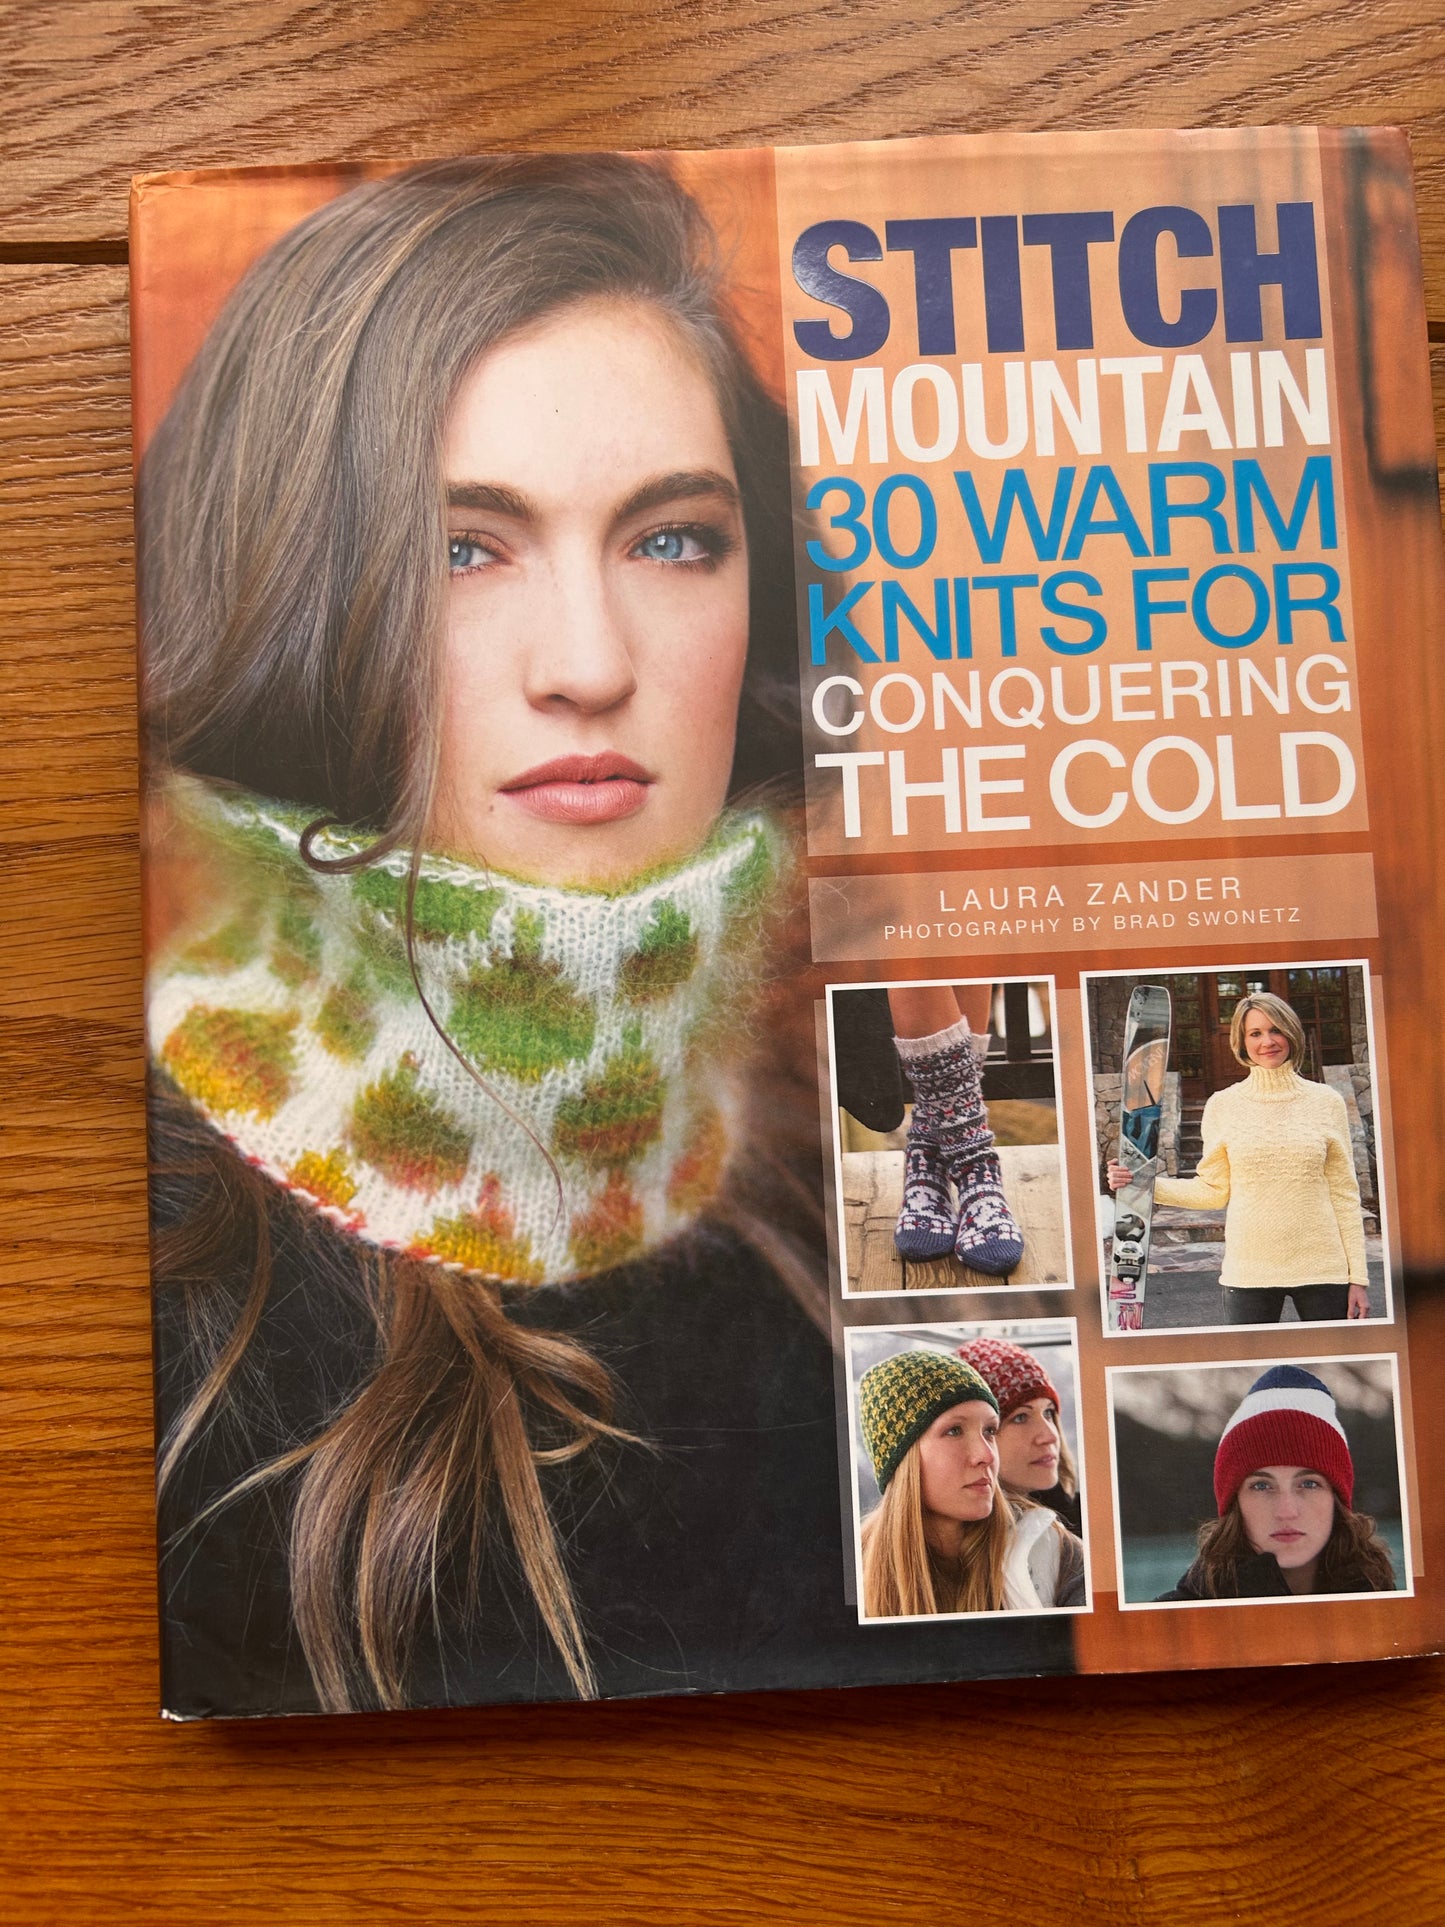 Stitch Mountain: 30 Warm Knits for Conquering the Cold